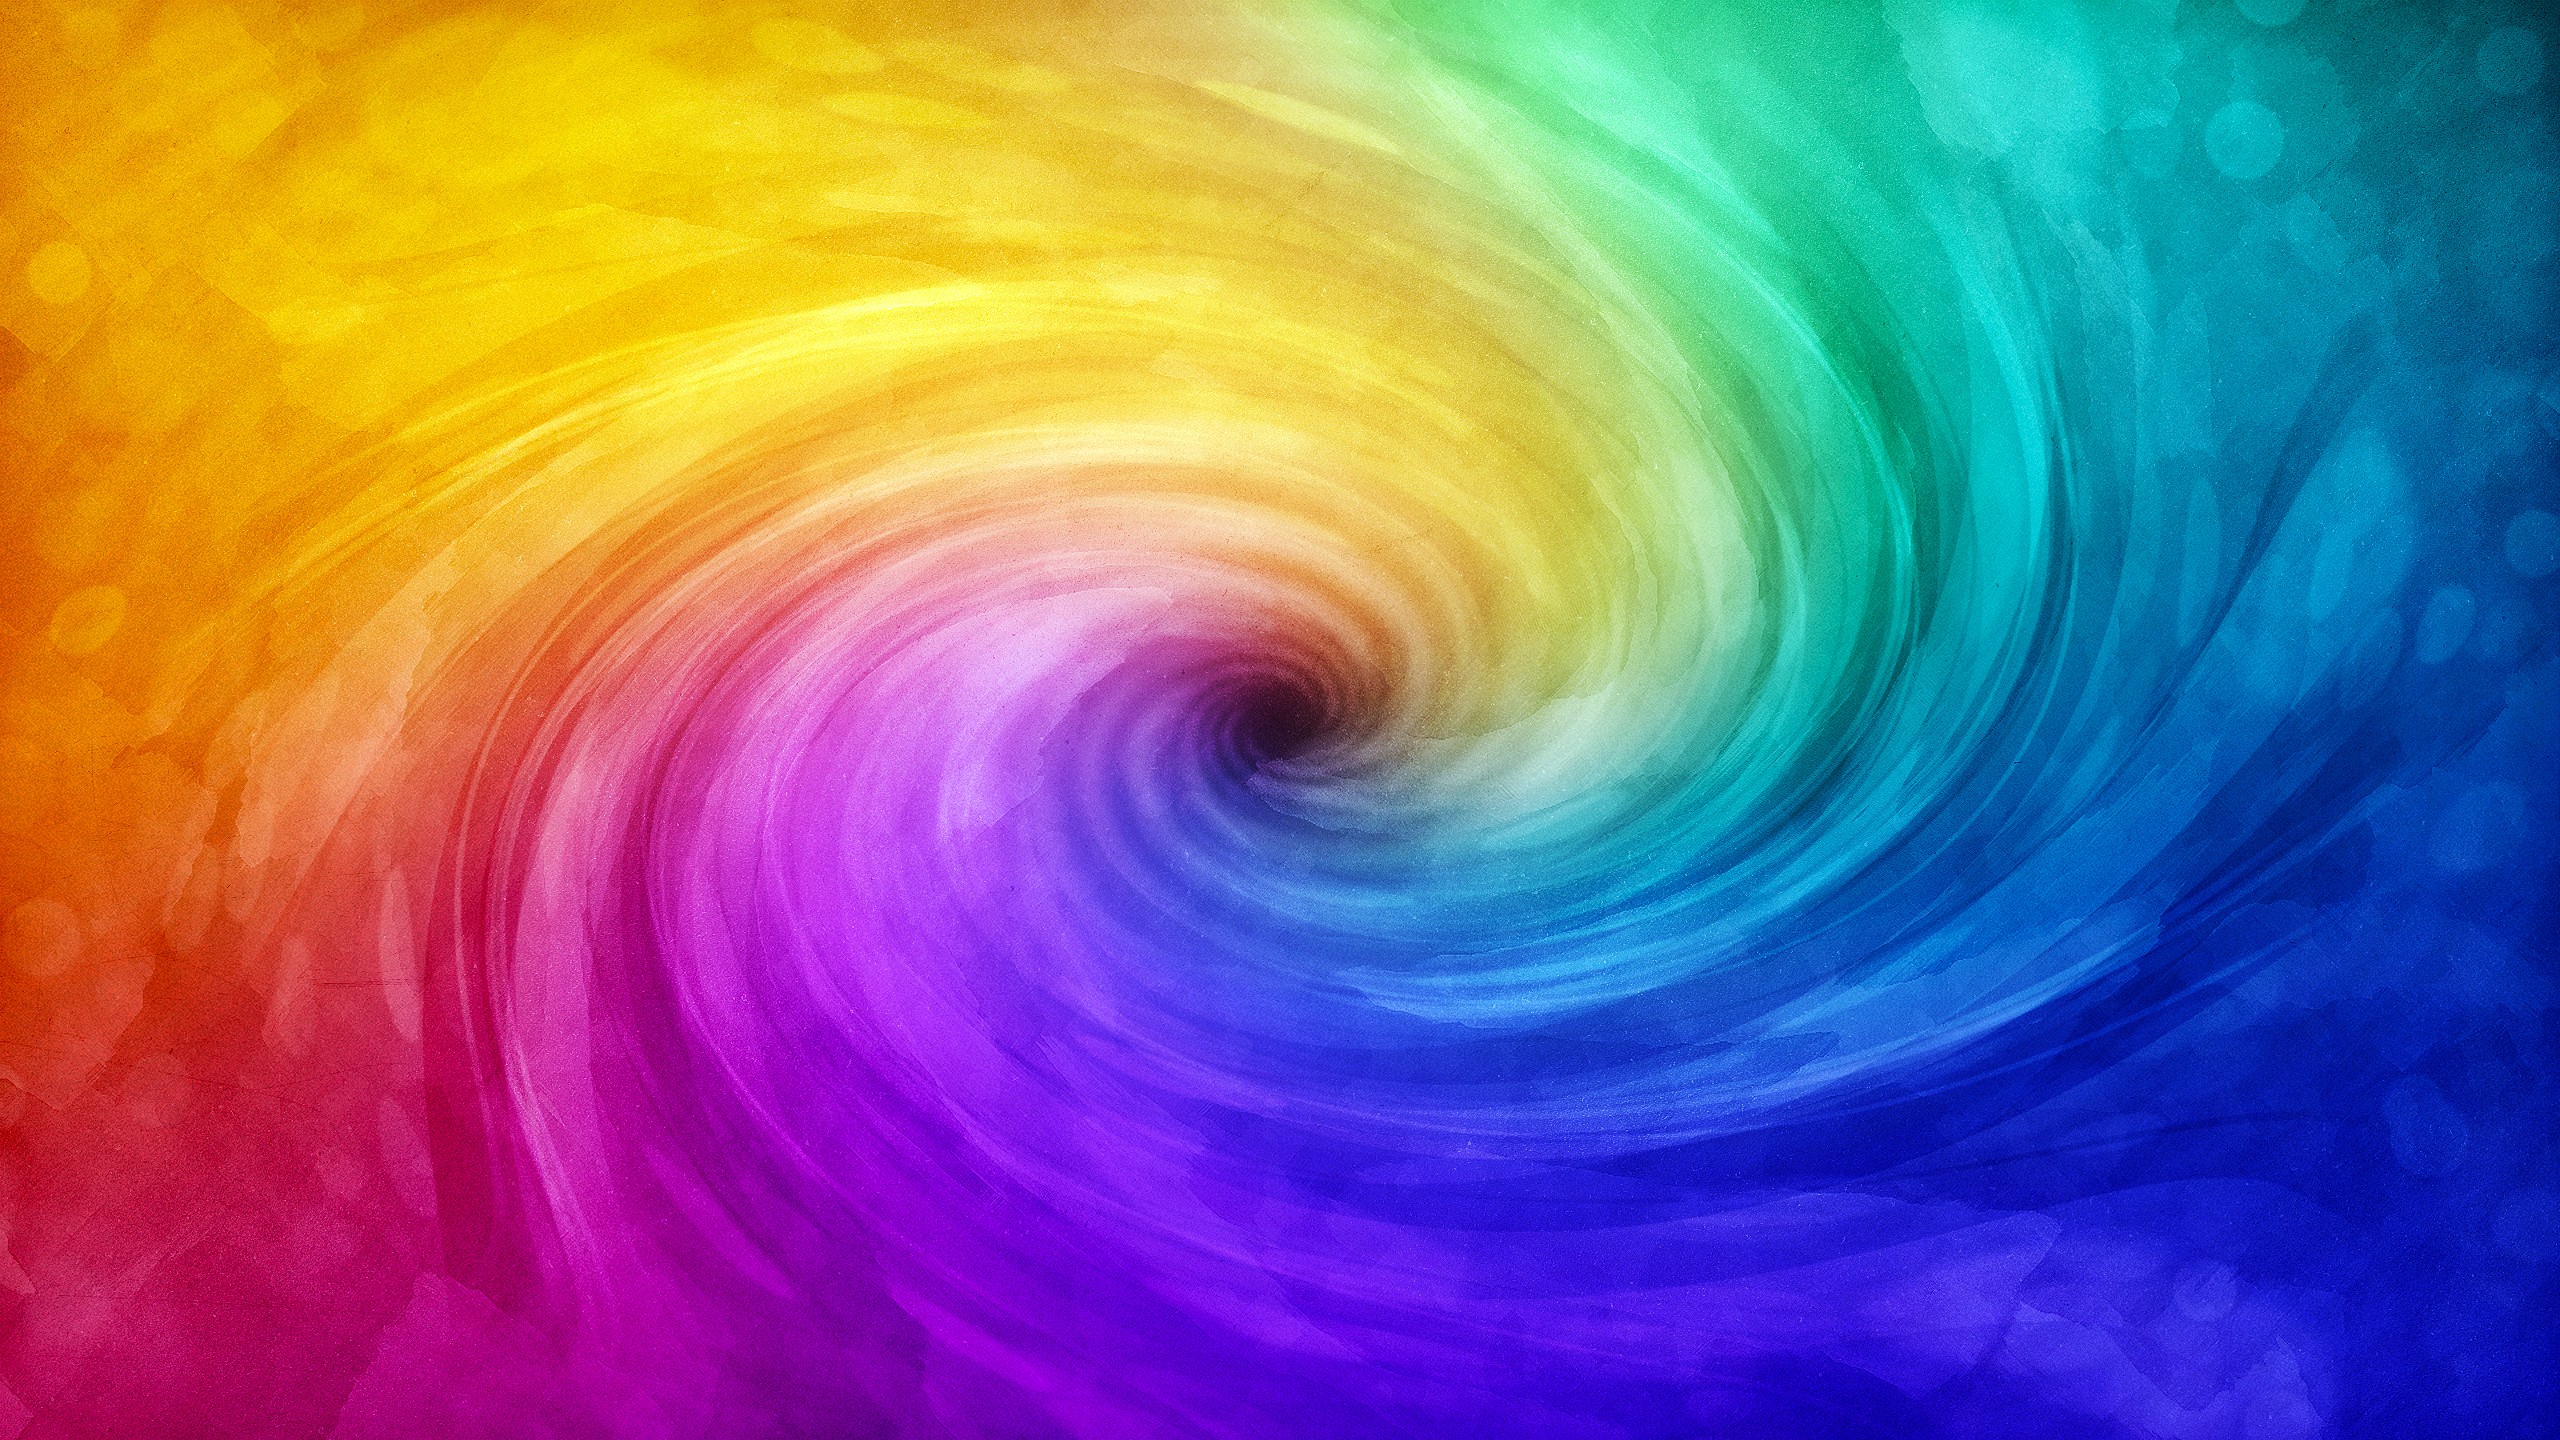 Wallpaper, colorful, abstract, spiral, texture, circle, atmosphere, vortex, color, wave, line, computer wallpaper 2560x1440